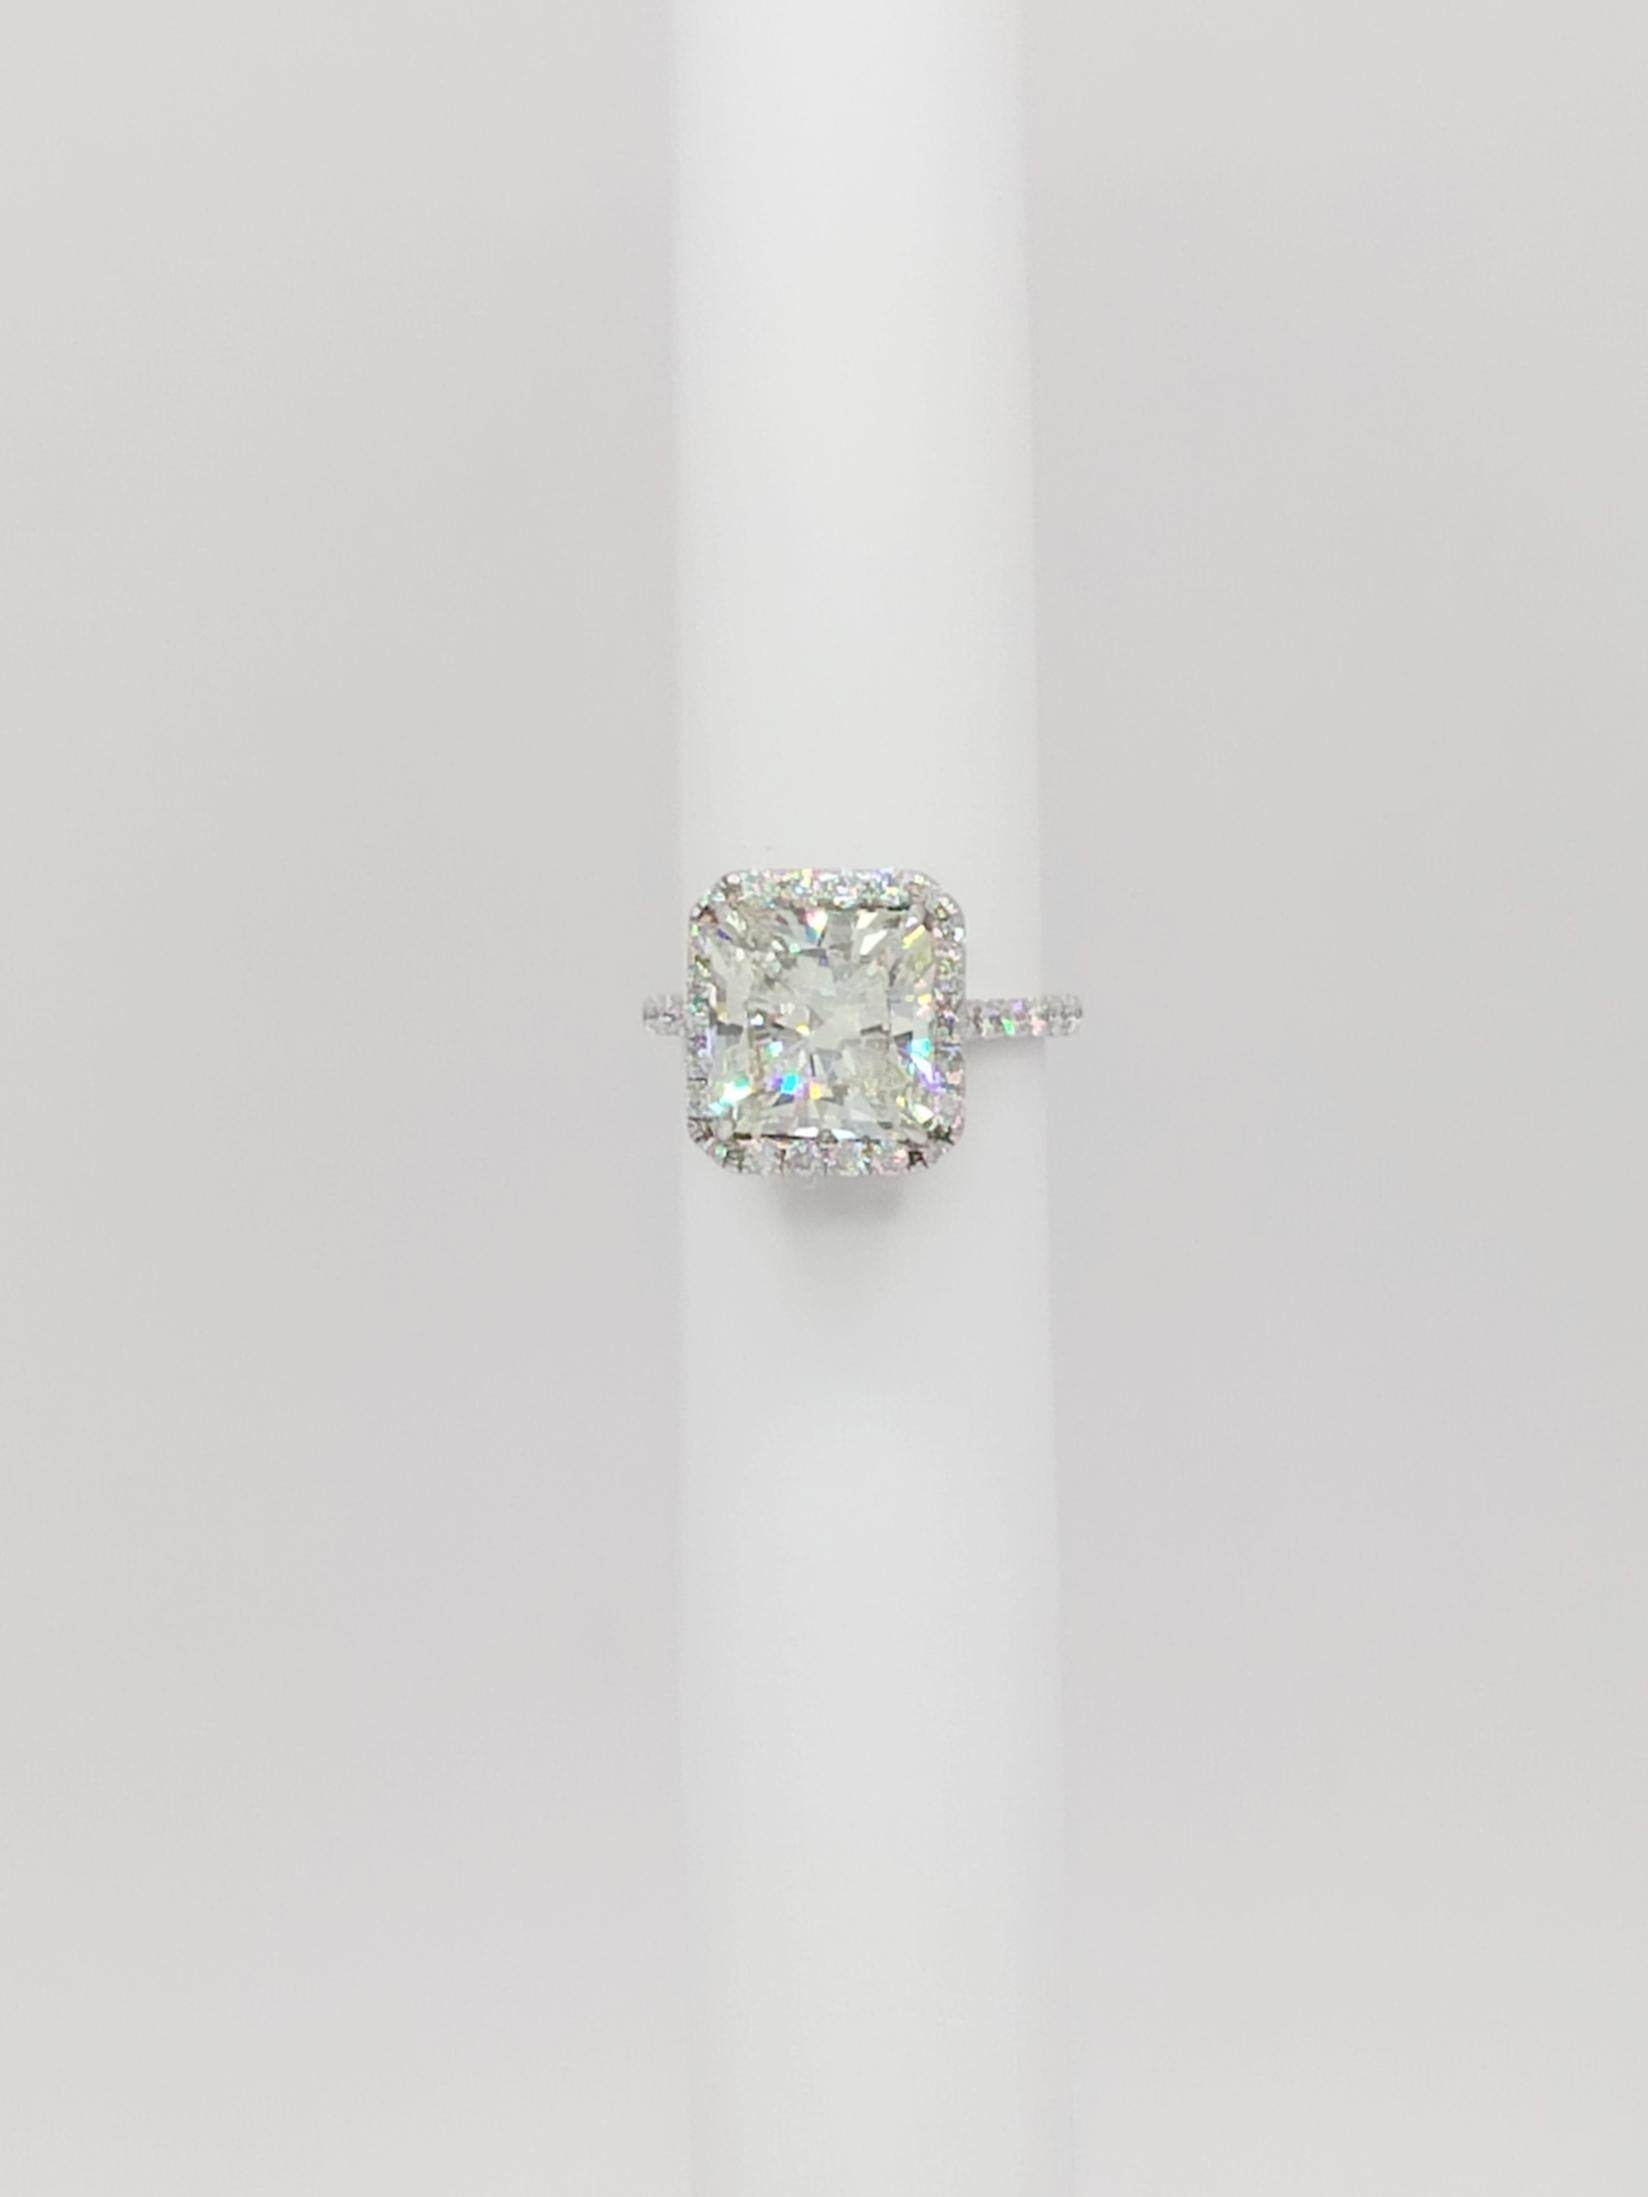 GIA 5.27 ct. White Diamond Radiant Ring on 18K White Gold In New Condition For Sale In Los Angeles, CA